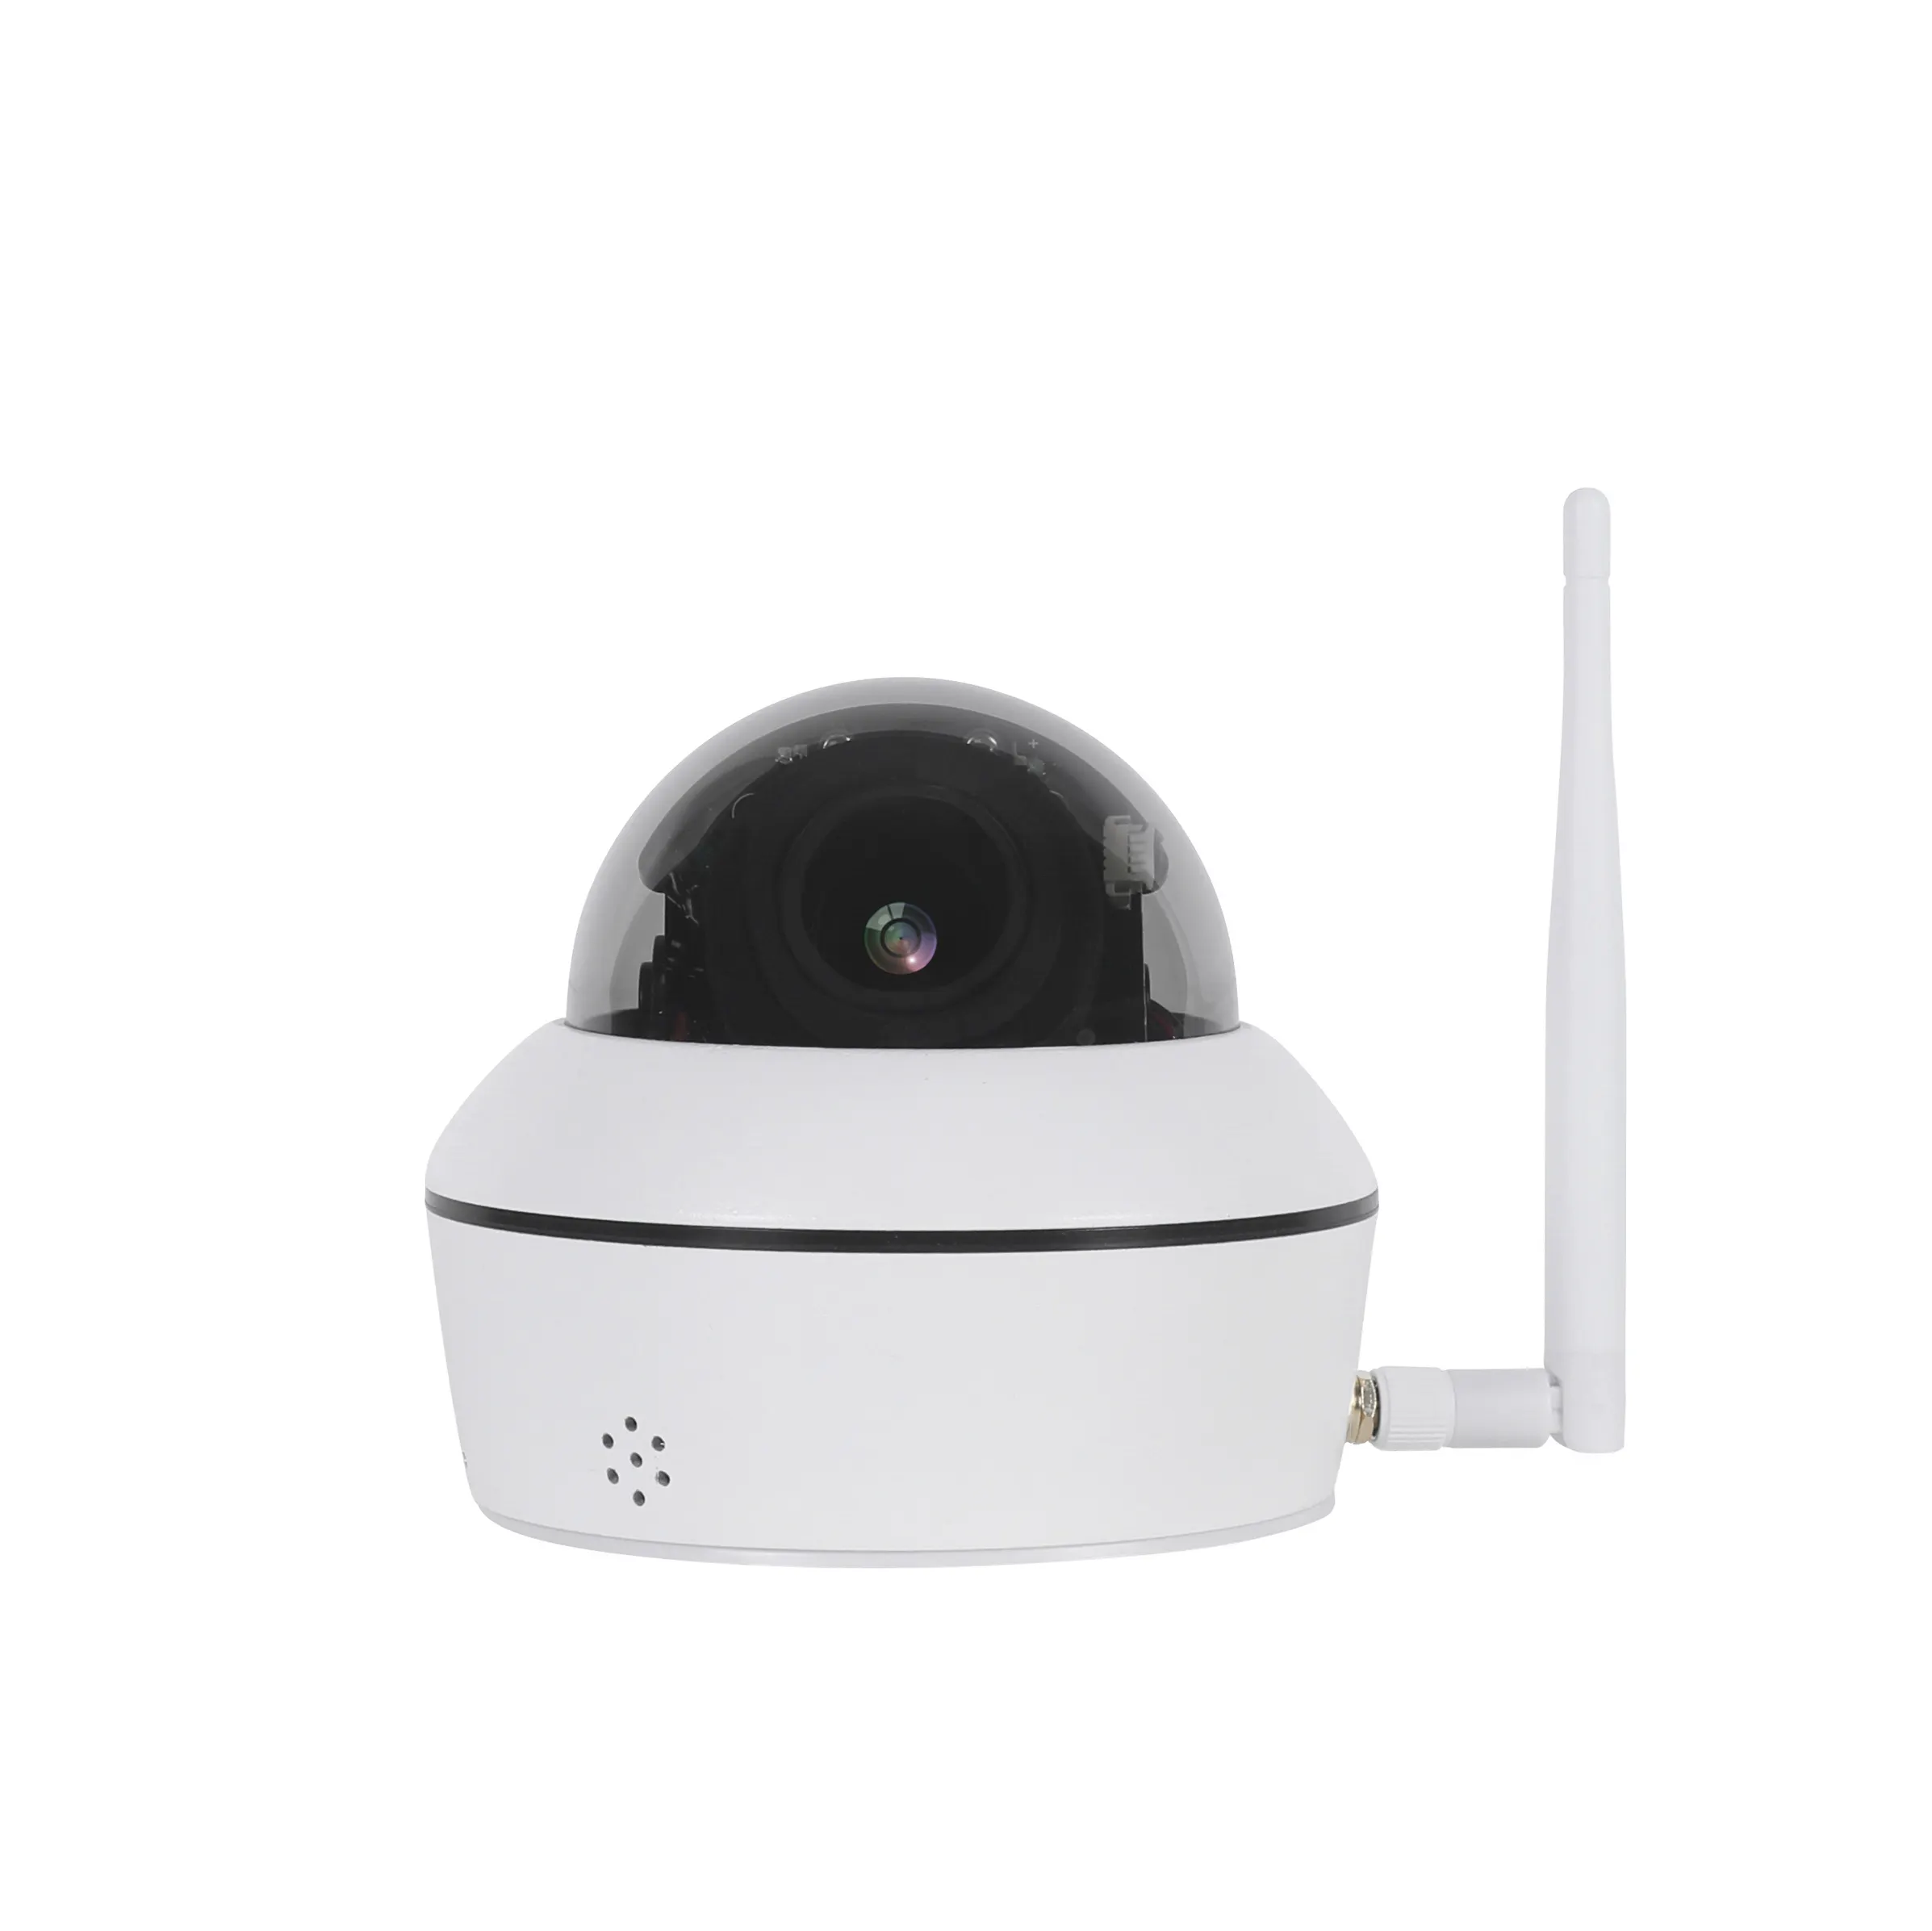 Auto Tracking rotatable Full HD 5MP Camera Motion Detection Alarm Outdoor IP Wifi Wireless PTZ CCTV Cameras